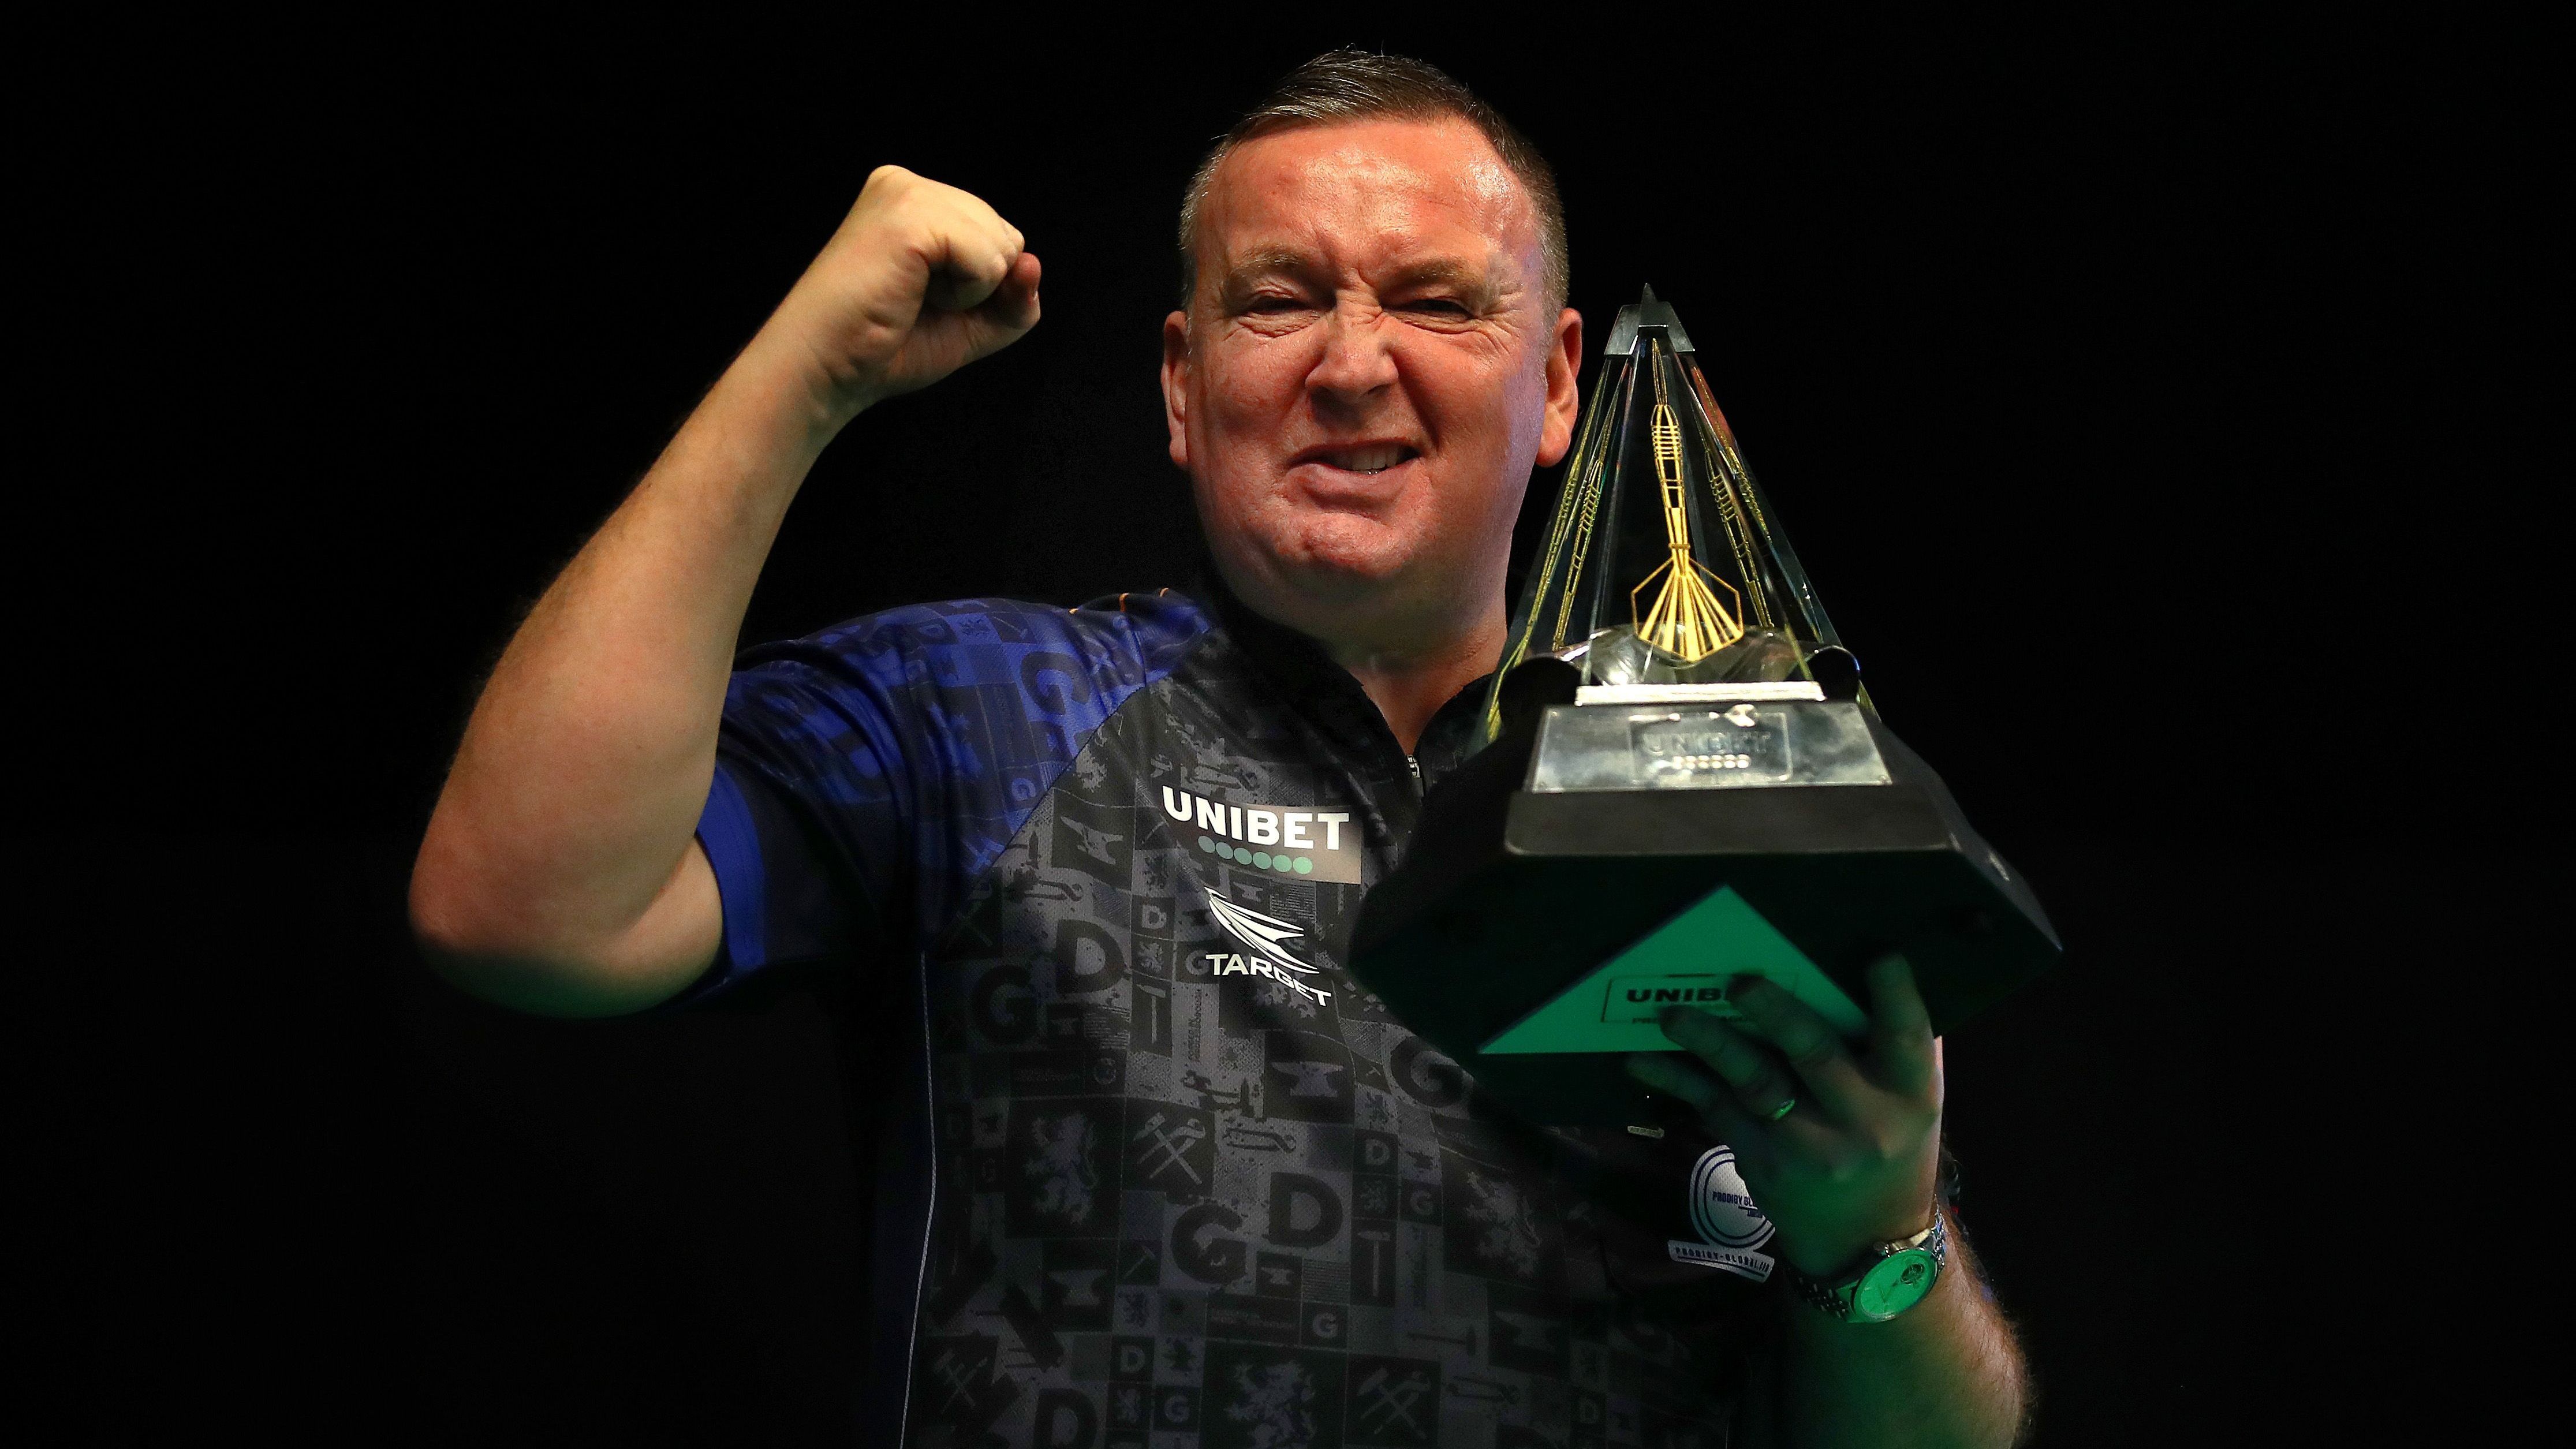 <strong>2020: Glen Durrant<br></strong>Platzierung vor dem Final Four: 1.<br>Weitere Spieler im Final Four: Peter Wright, Nathan Aspinall, Gary Anderson<br>Gegner im Finale: Nathan Aspinall<br>Ergebnis im Finale: 11:8